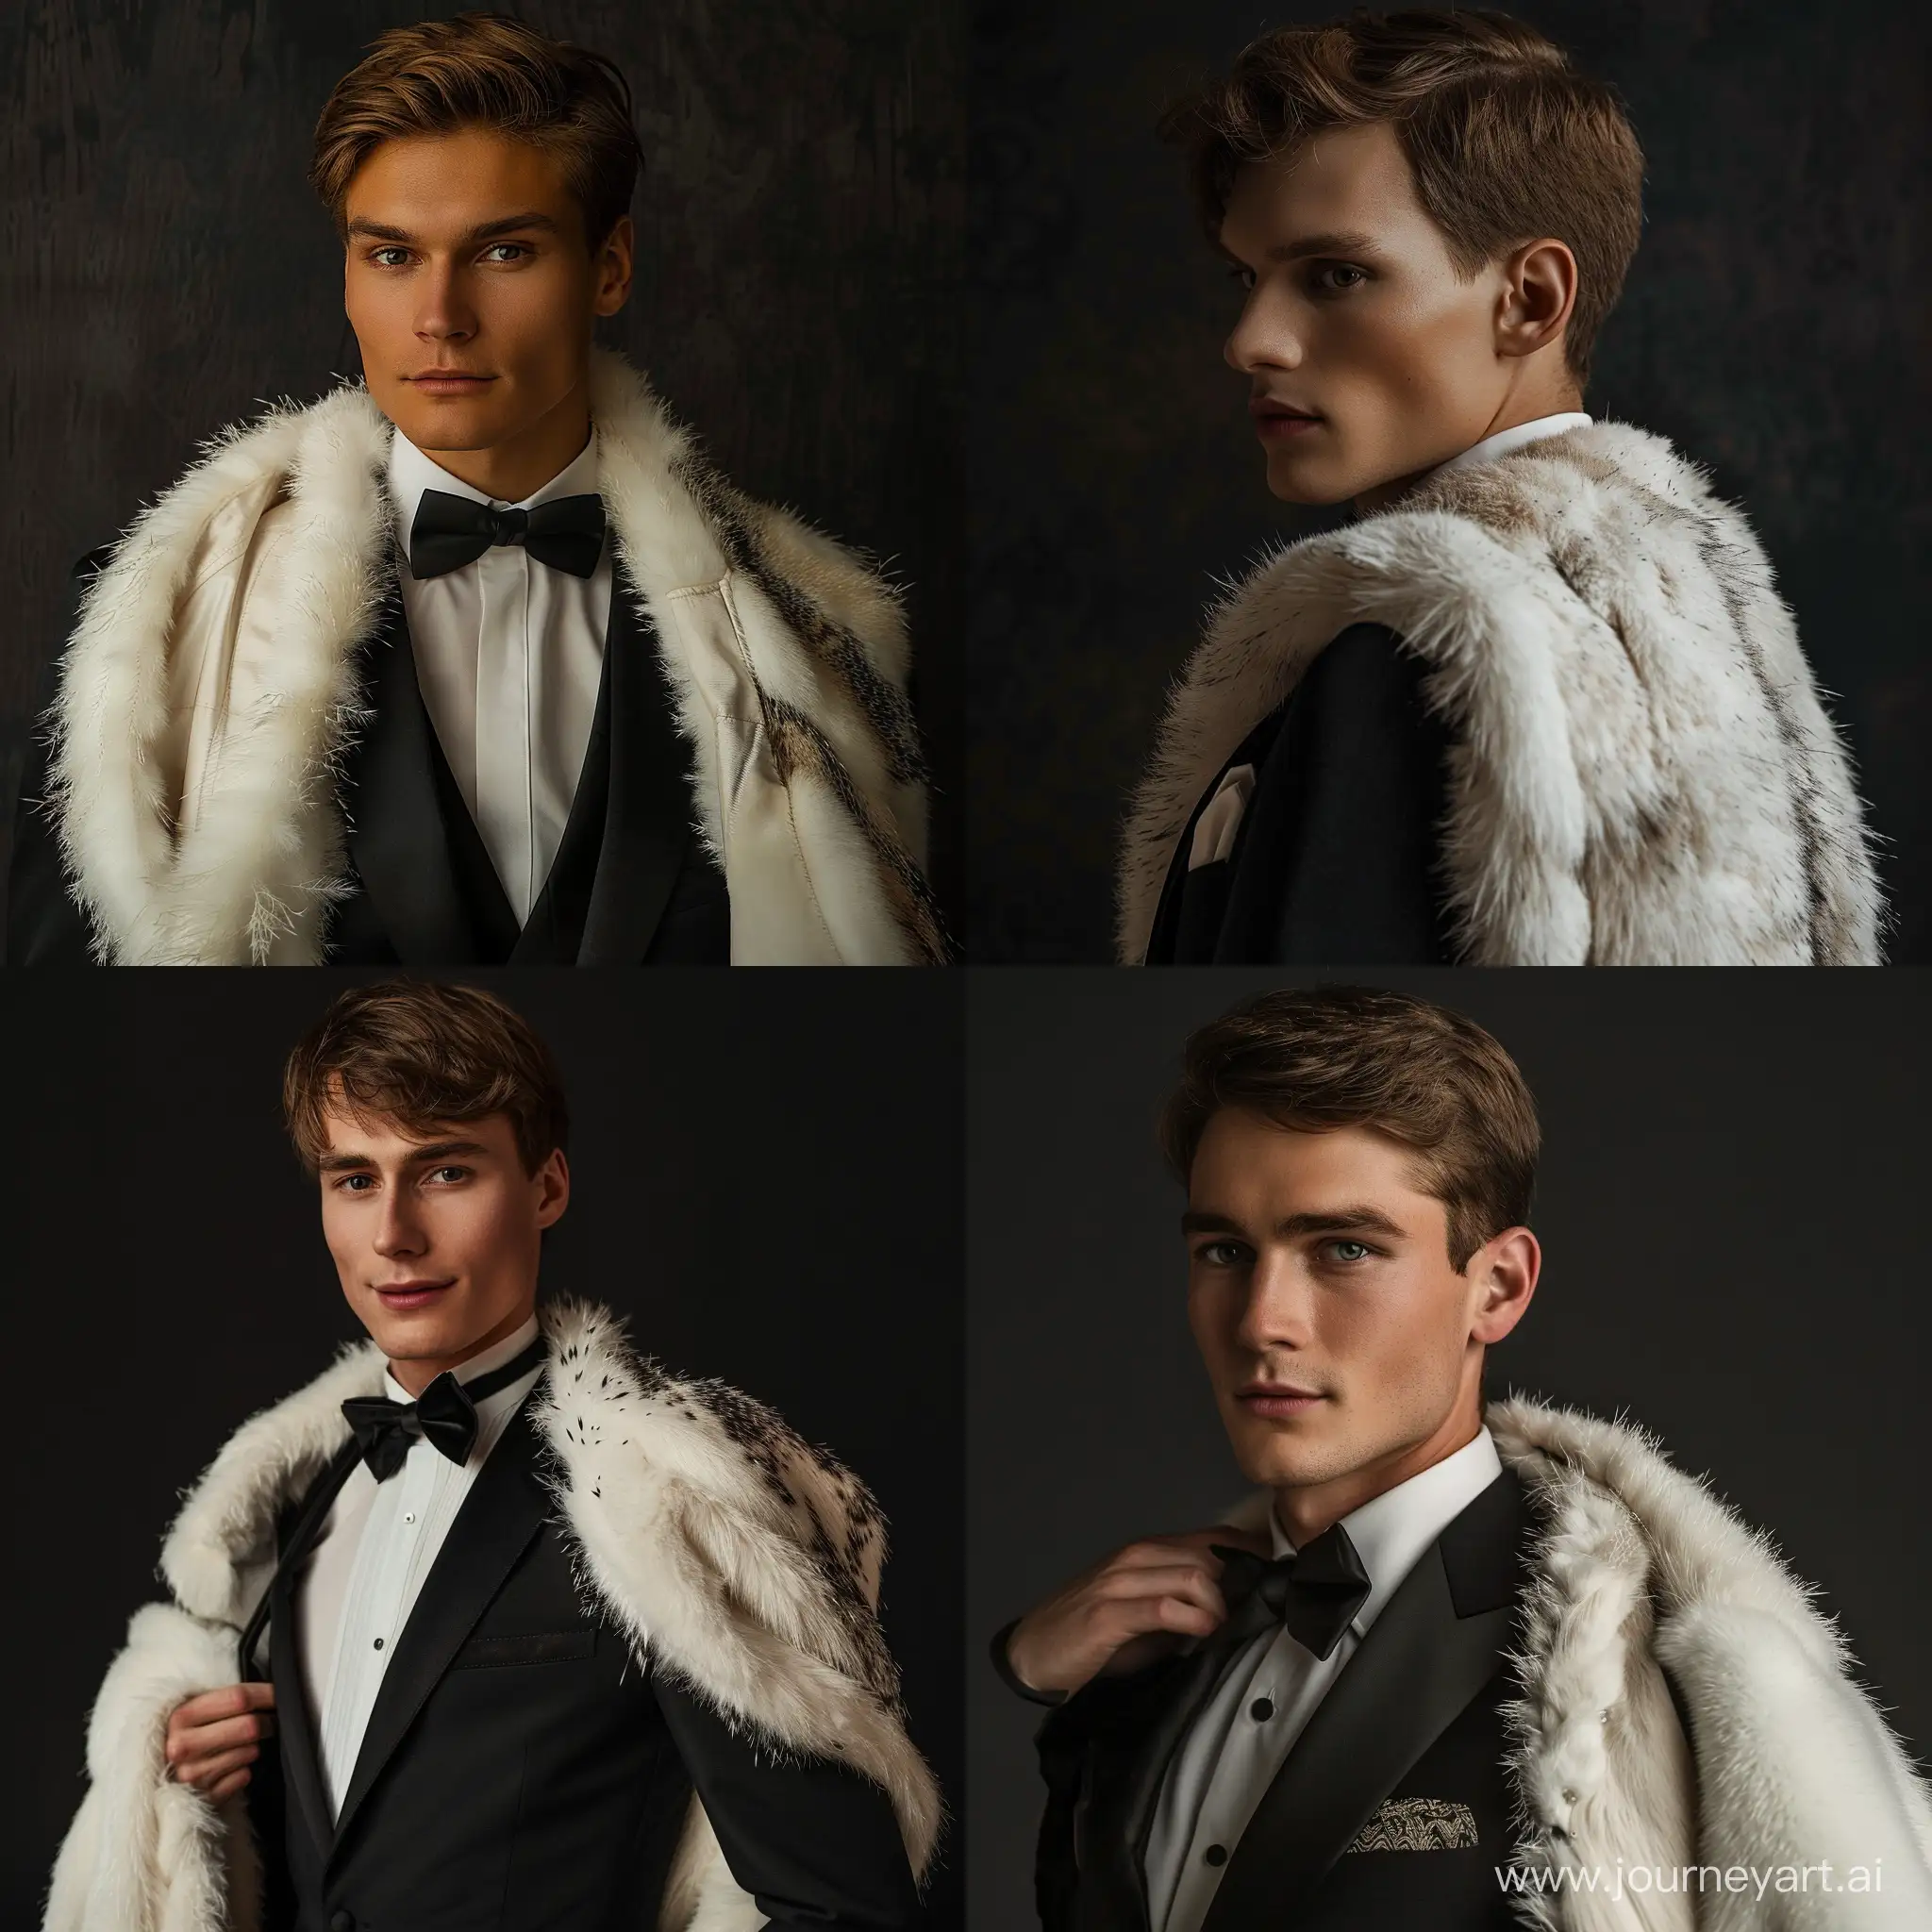 Retro-Glamor-Handsome-European-Man-in-1930s-Hollywood-Style-Tuxedo-and-Fur-Coat